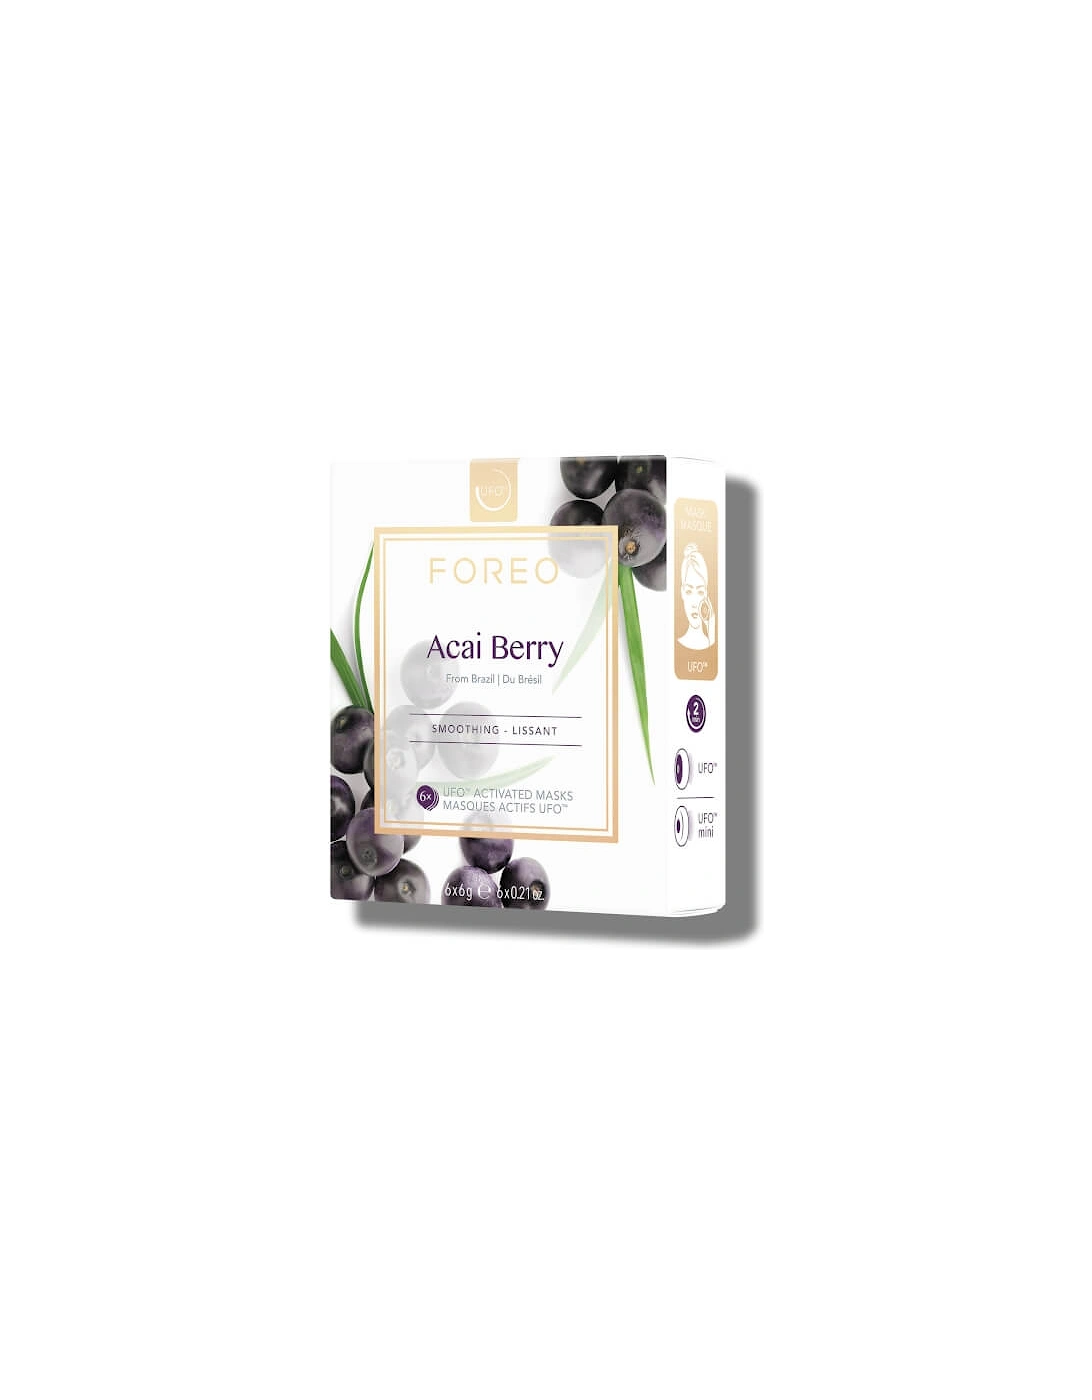 Acai Berry UFO/UFO Mini Firming Face Mask for Ageing Skin (6 Pack) - - Acai Berry UFO/UFO Mini Firming Face Mask for Ageing Skin (6 Pack) - Joy - Acai Berry UFO/UFO Mini Firming Face Mask for Ageing Skin (6 Pack) - Eve, 2 of 1